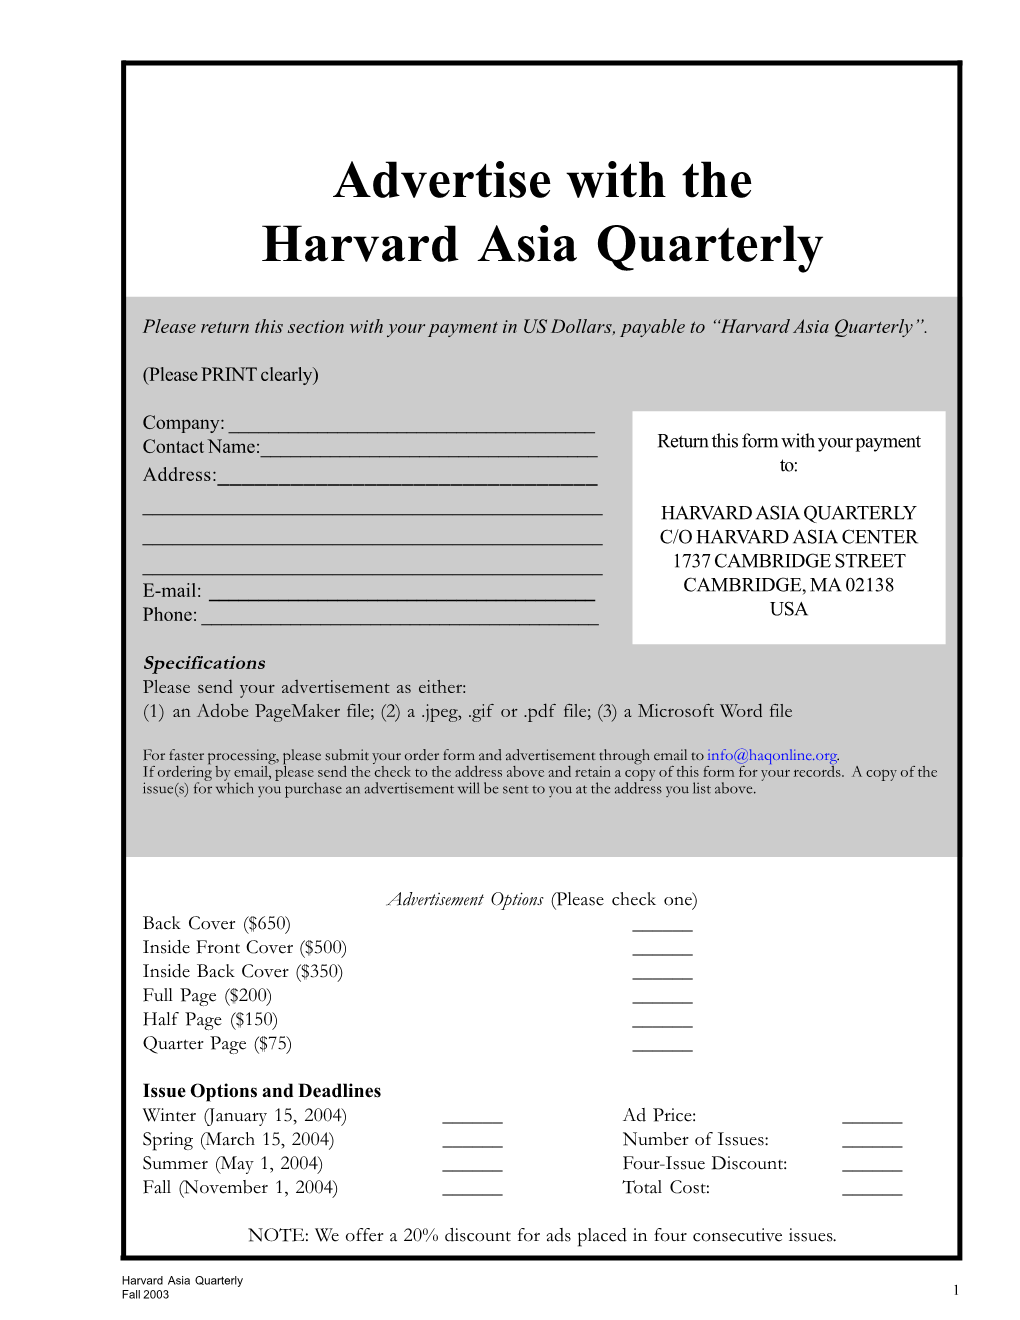 Advertise with the Harvard Asia Quarterly